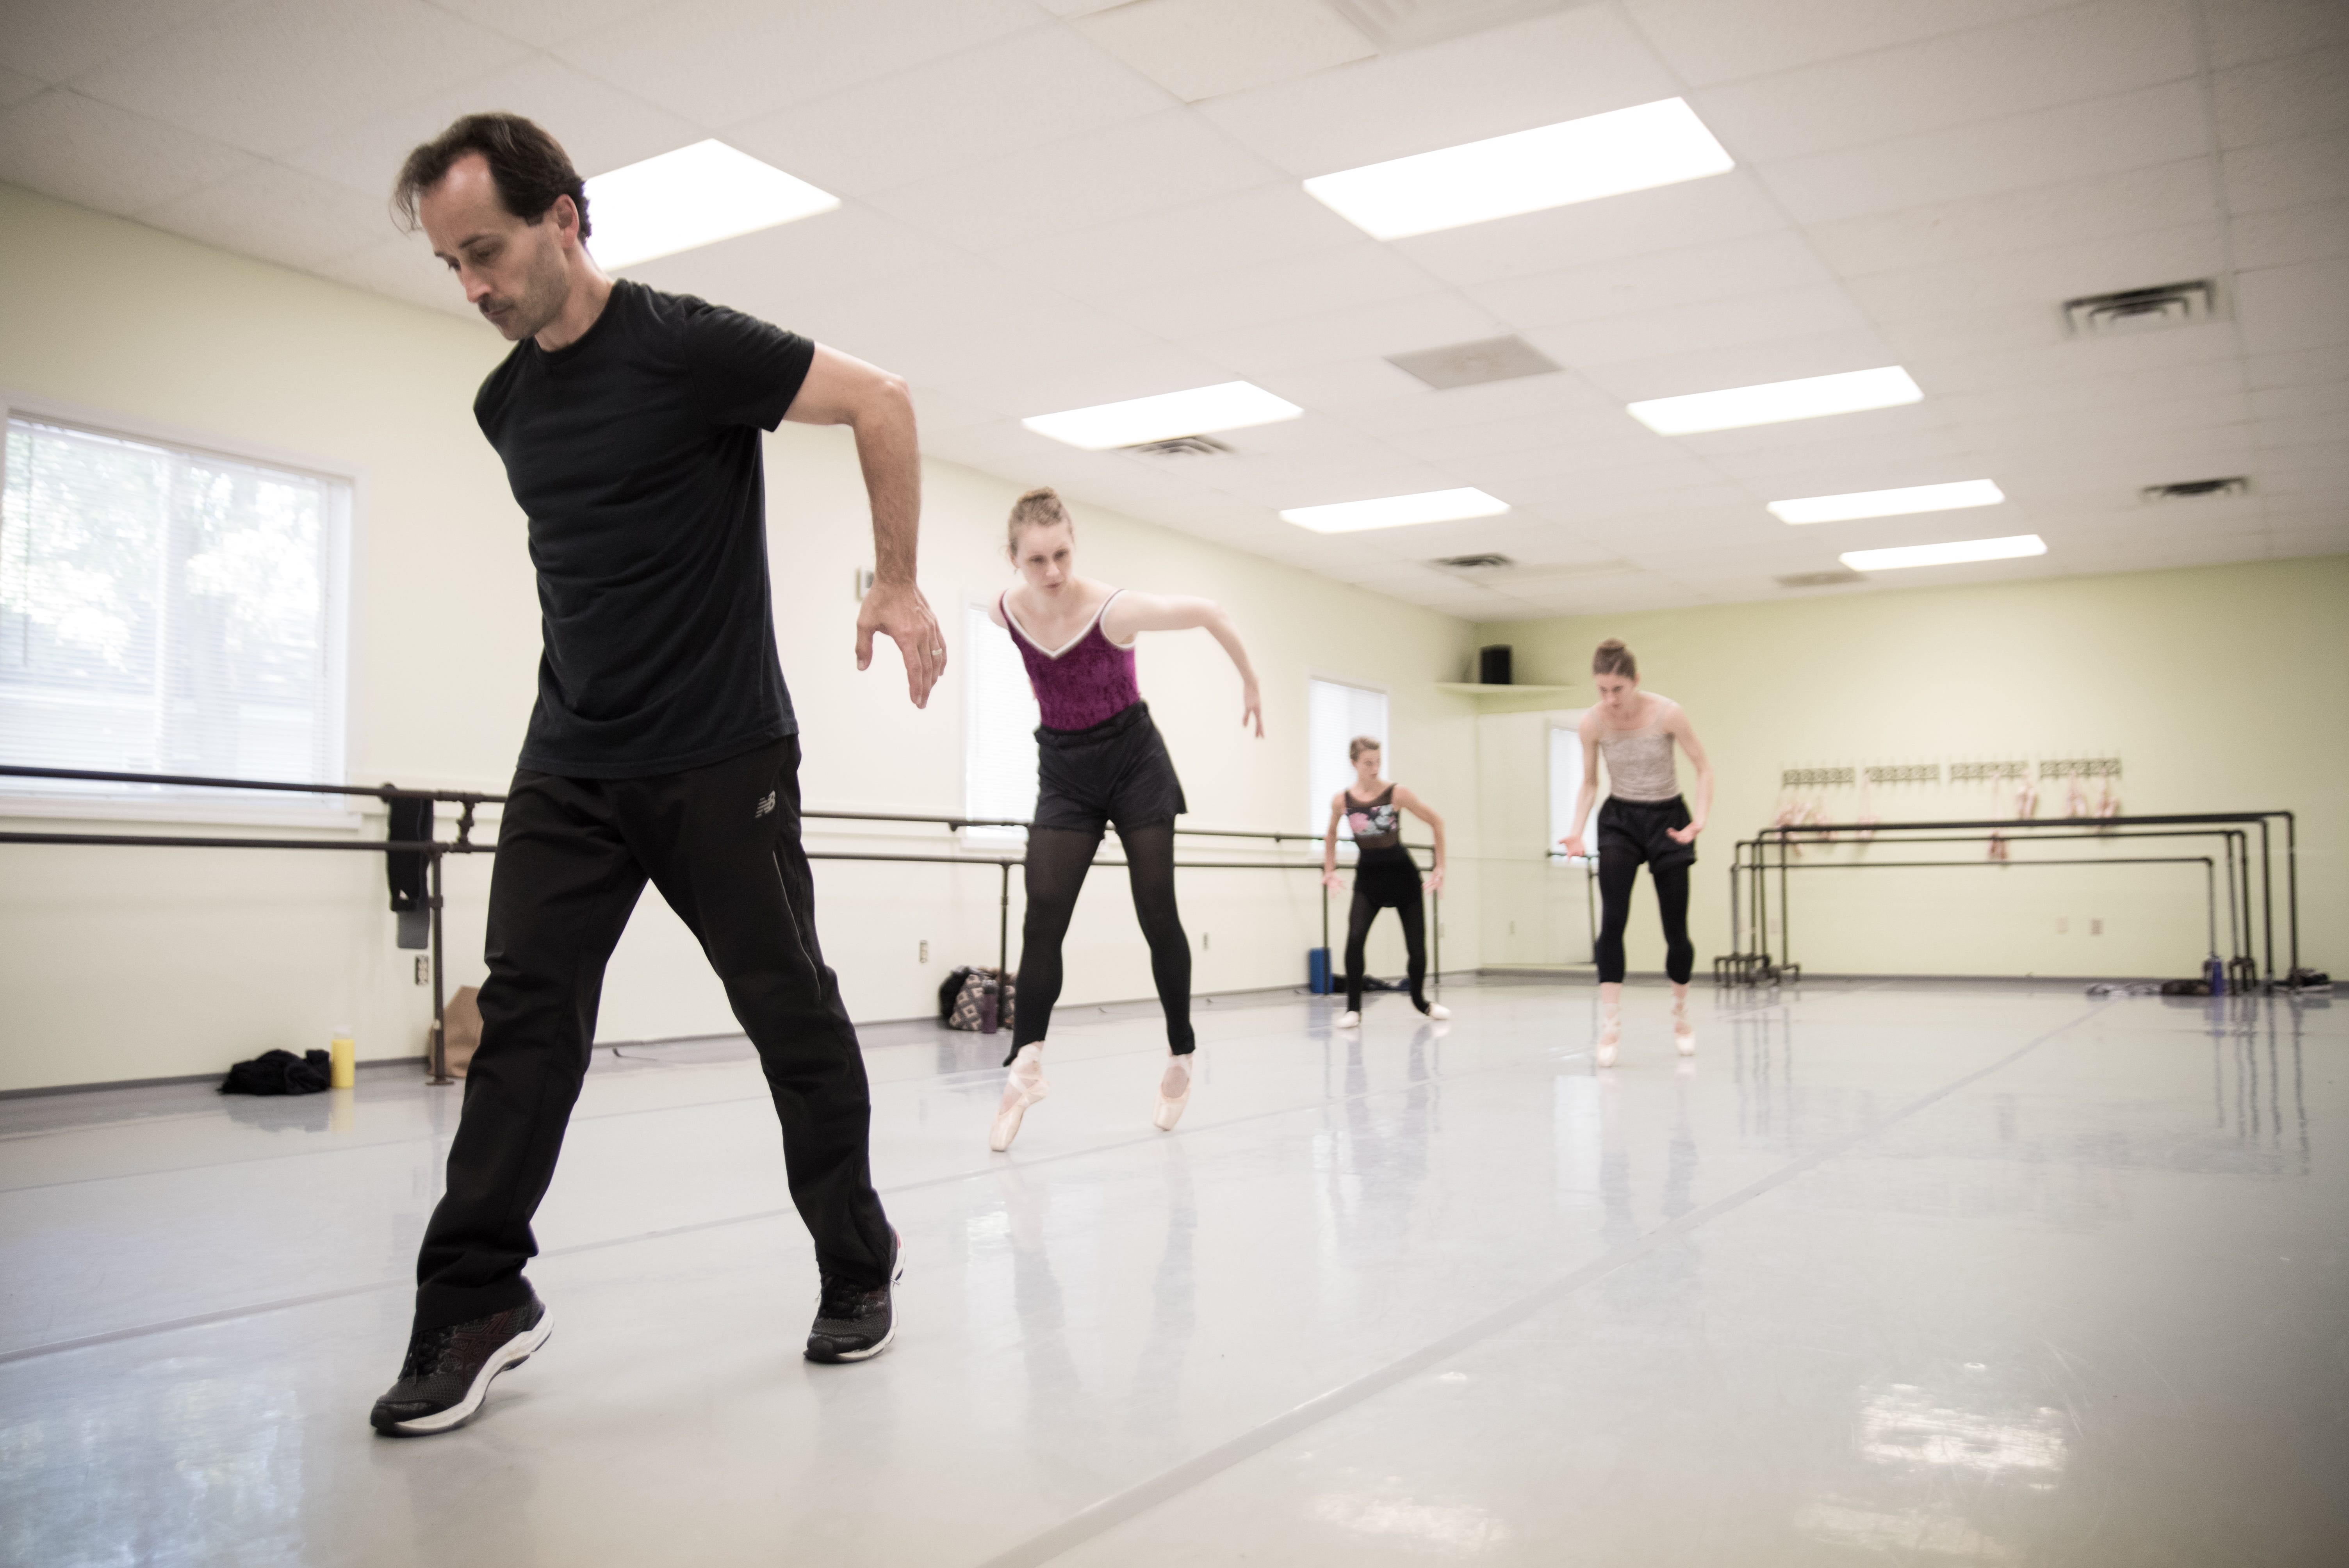 New Dance Company To Provide Performances In Normally Quiet